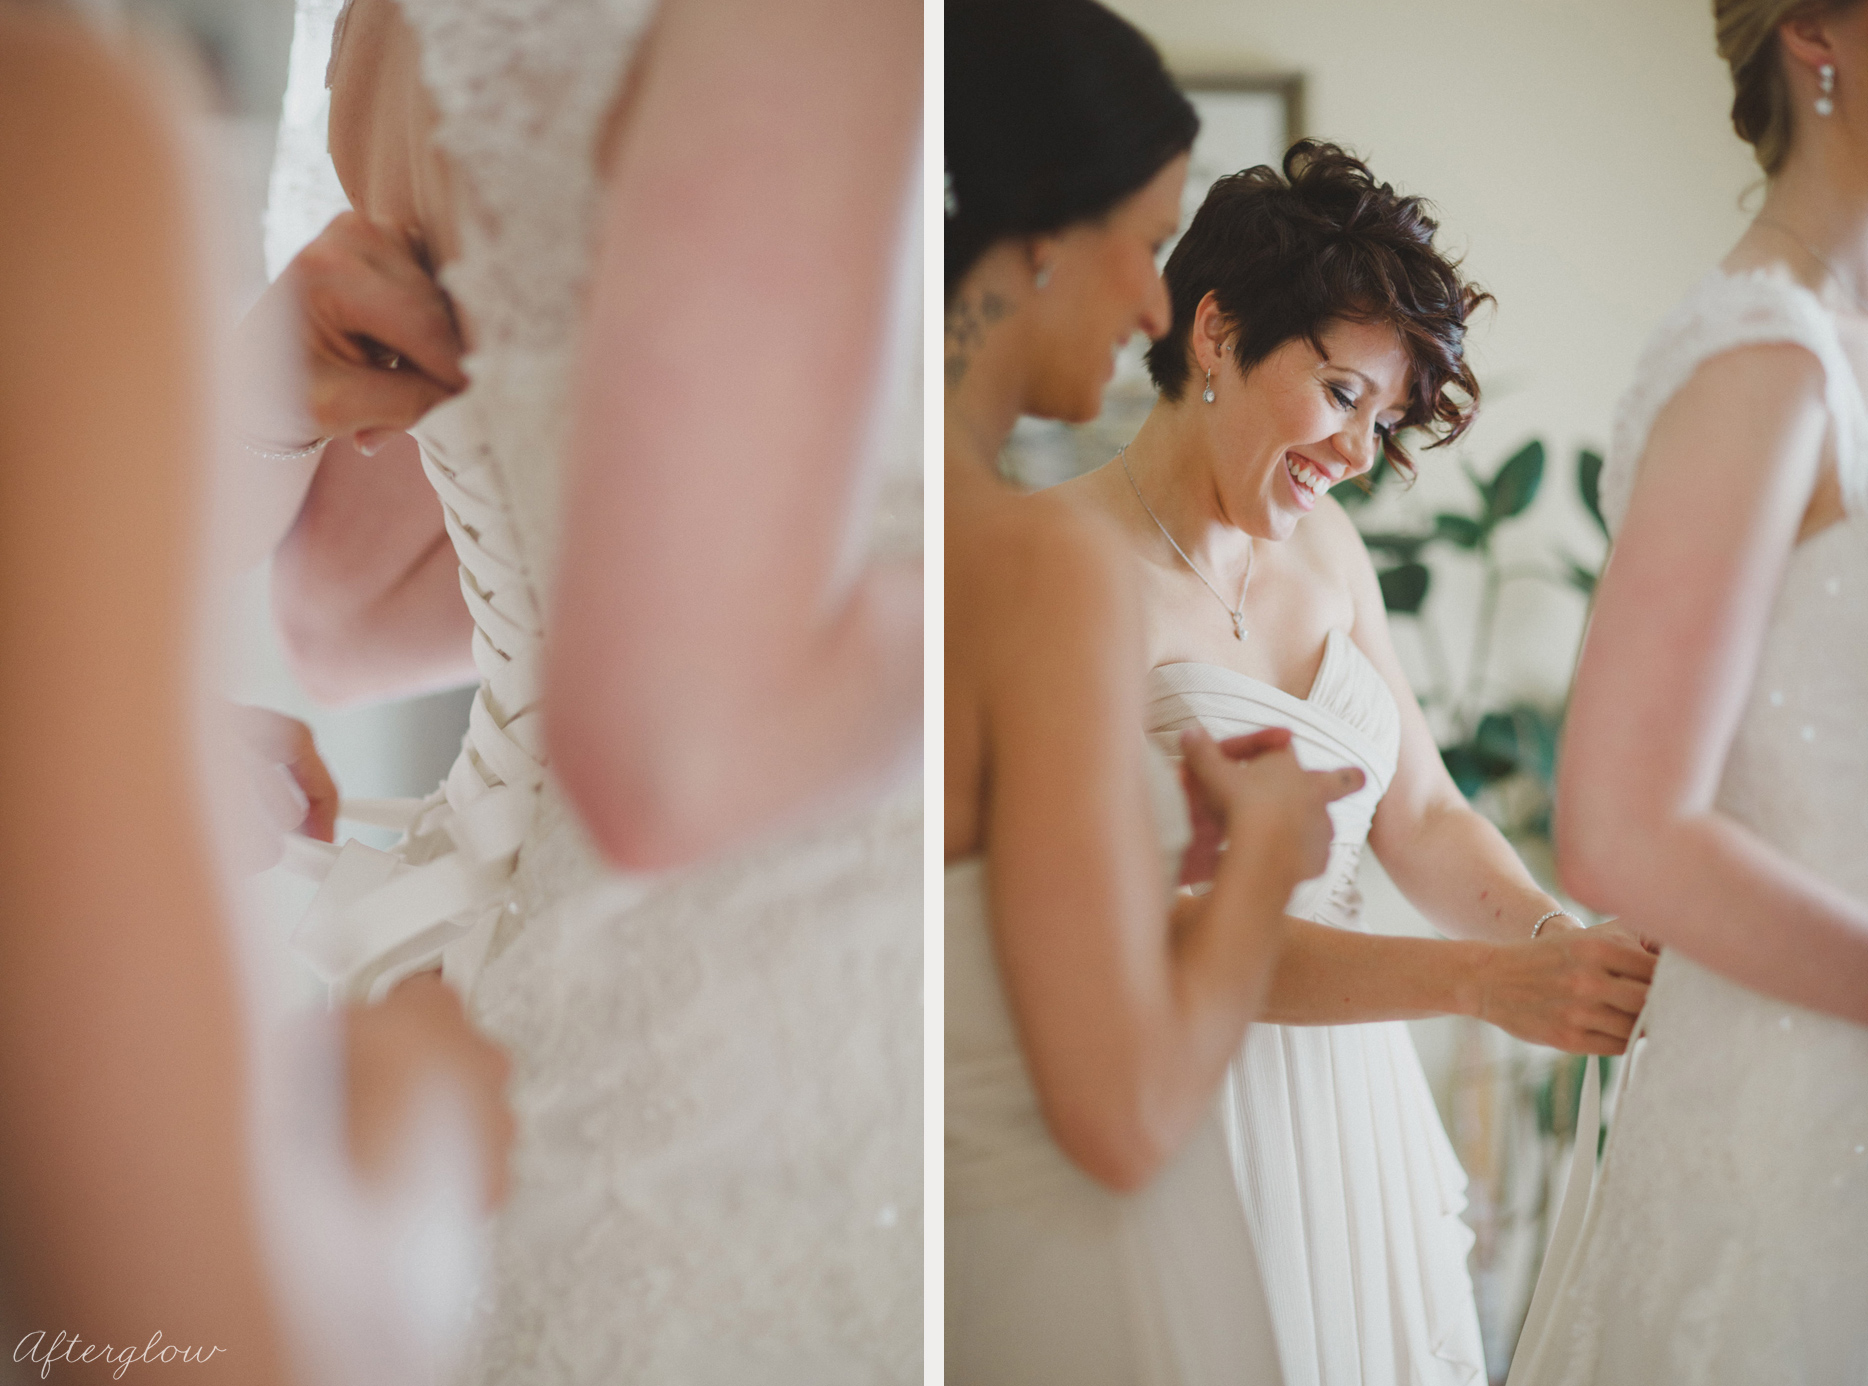 bride getting ready at home